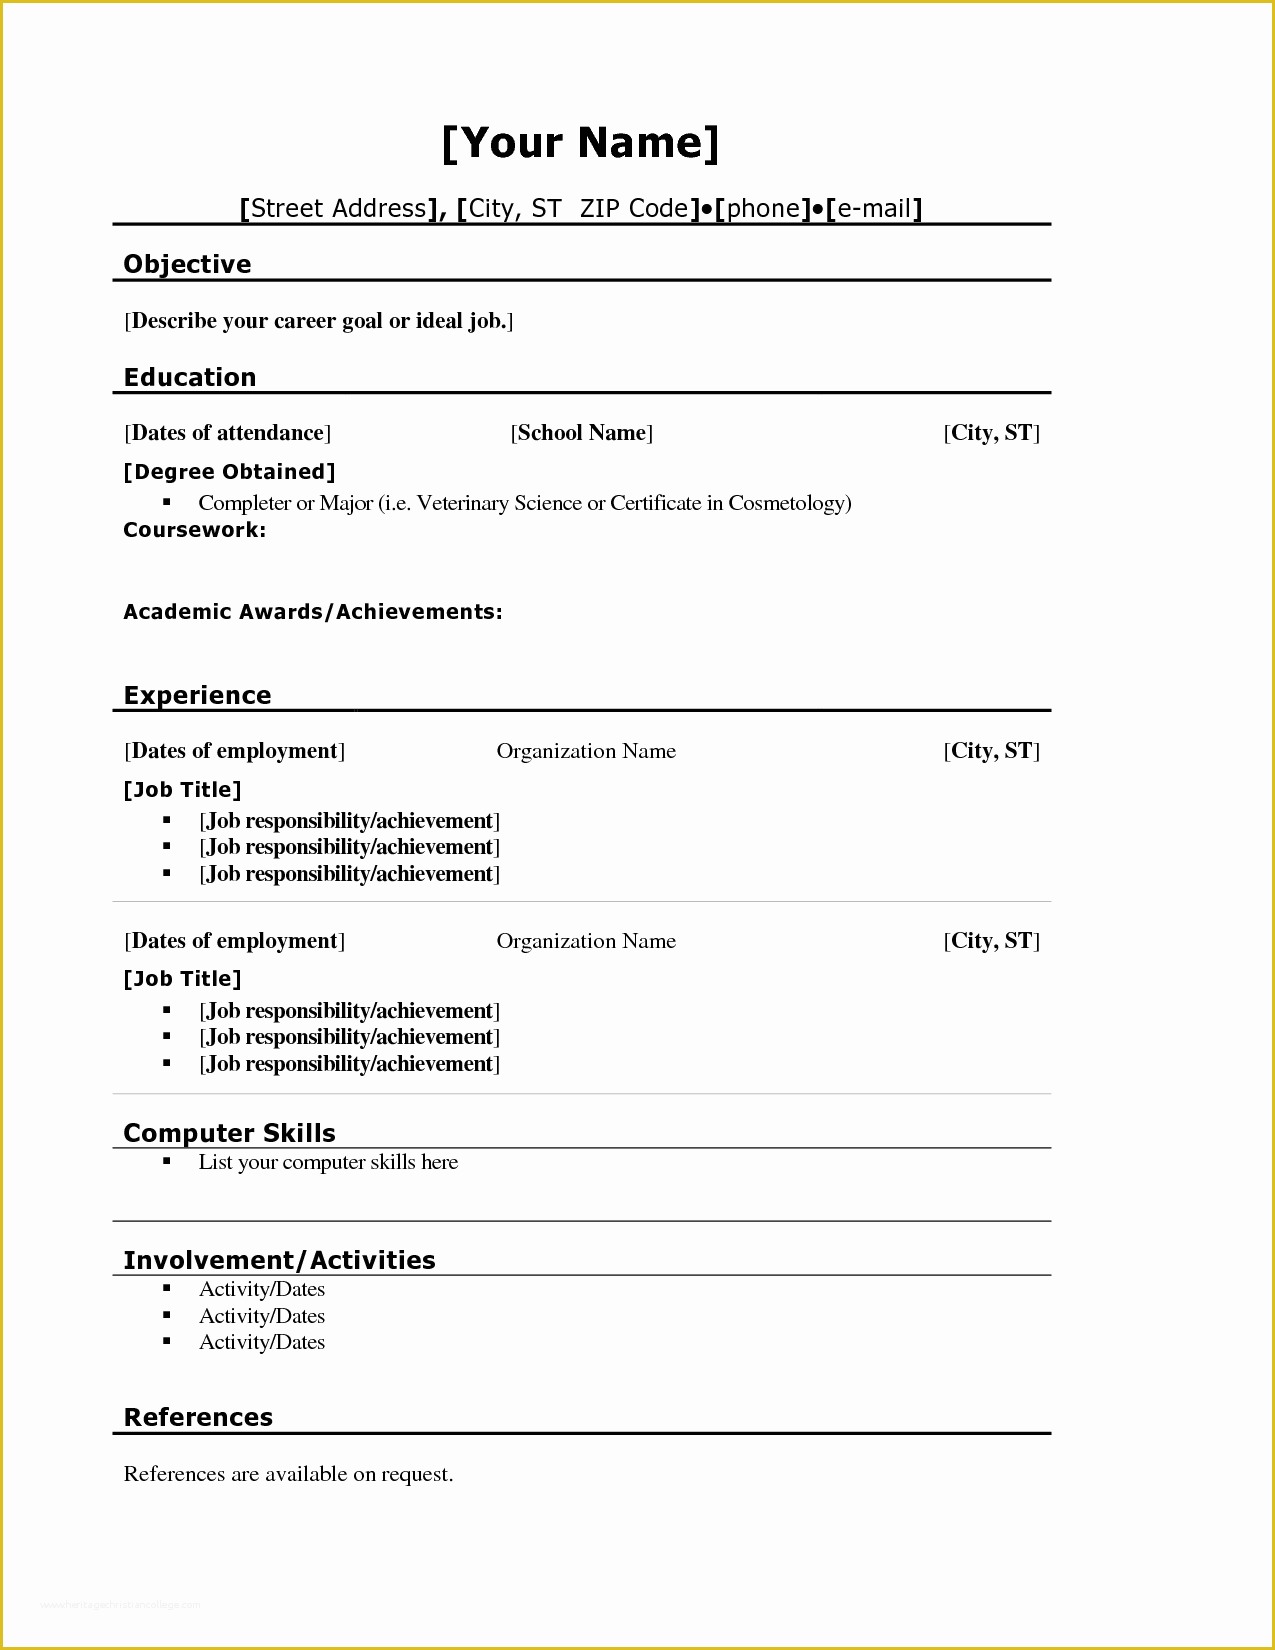 Free College Resume Templates Of Pin by Jobresume On Resume Career Termplate Free